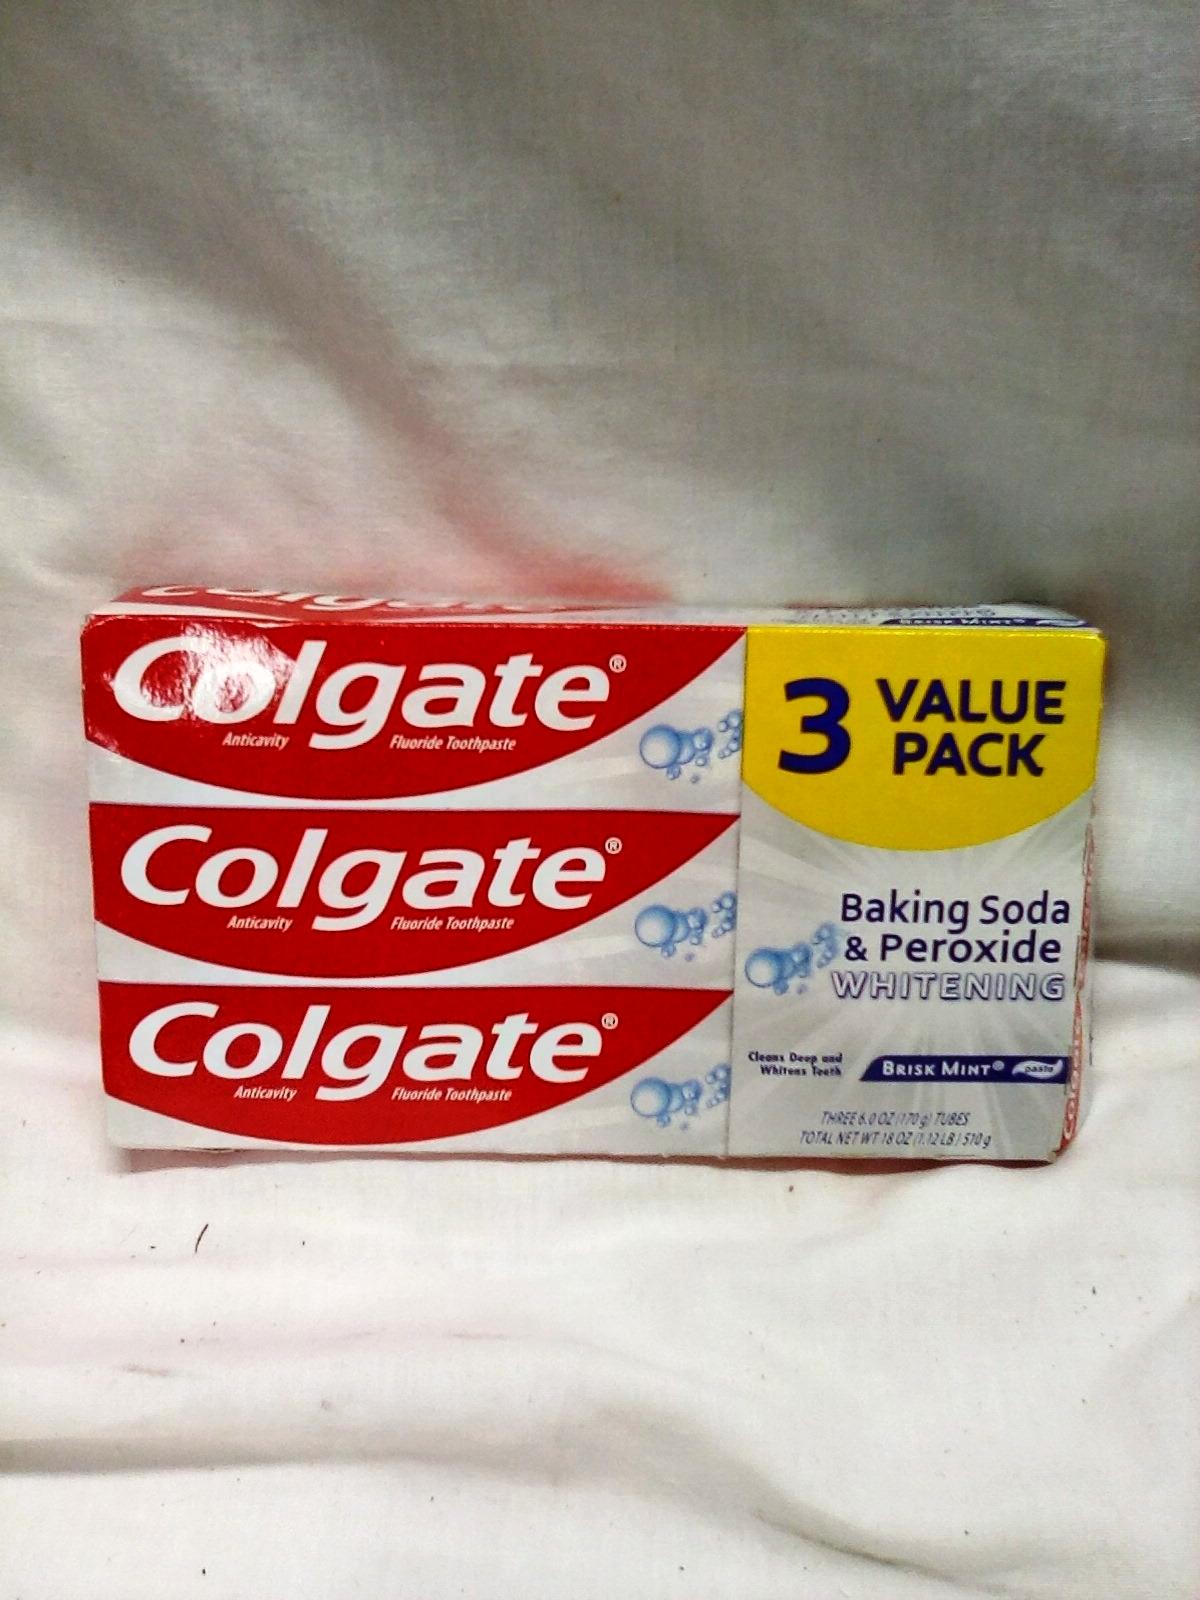 Qty: 3 6oz Tubes of Colgate Floride Toothpaste